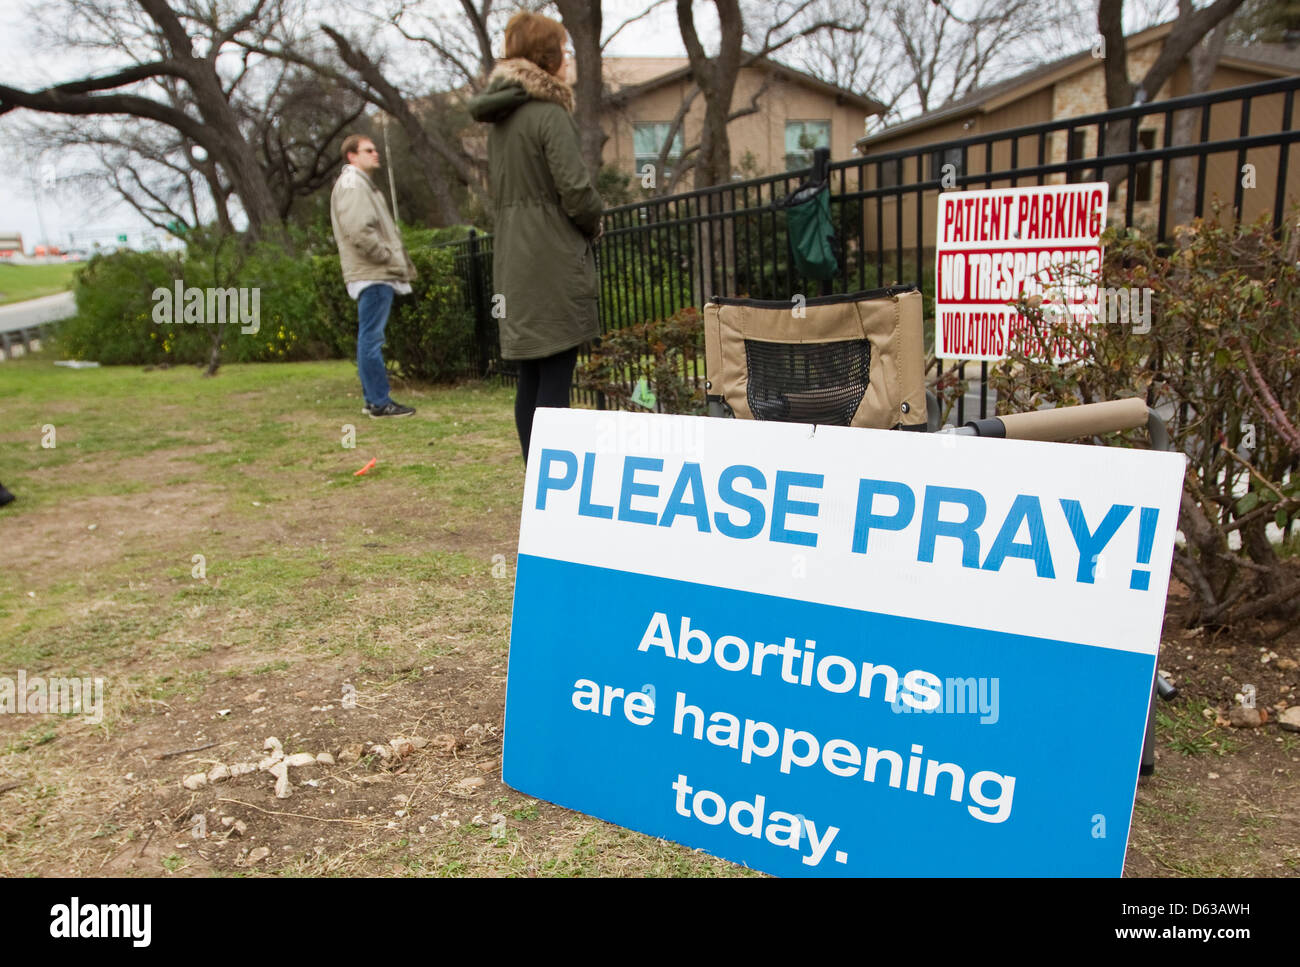 Several volunteers pray outside a South Austin clinic where abortions are performed as part of the pro-life campaign Stock Photo